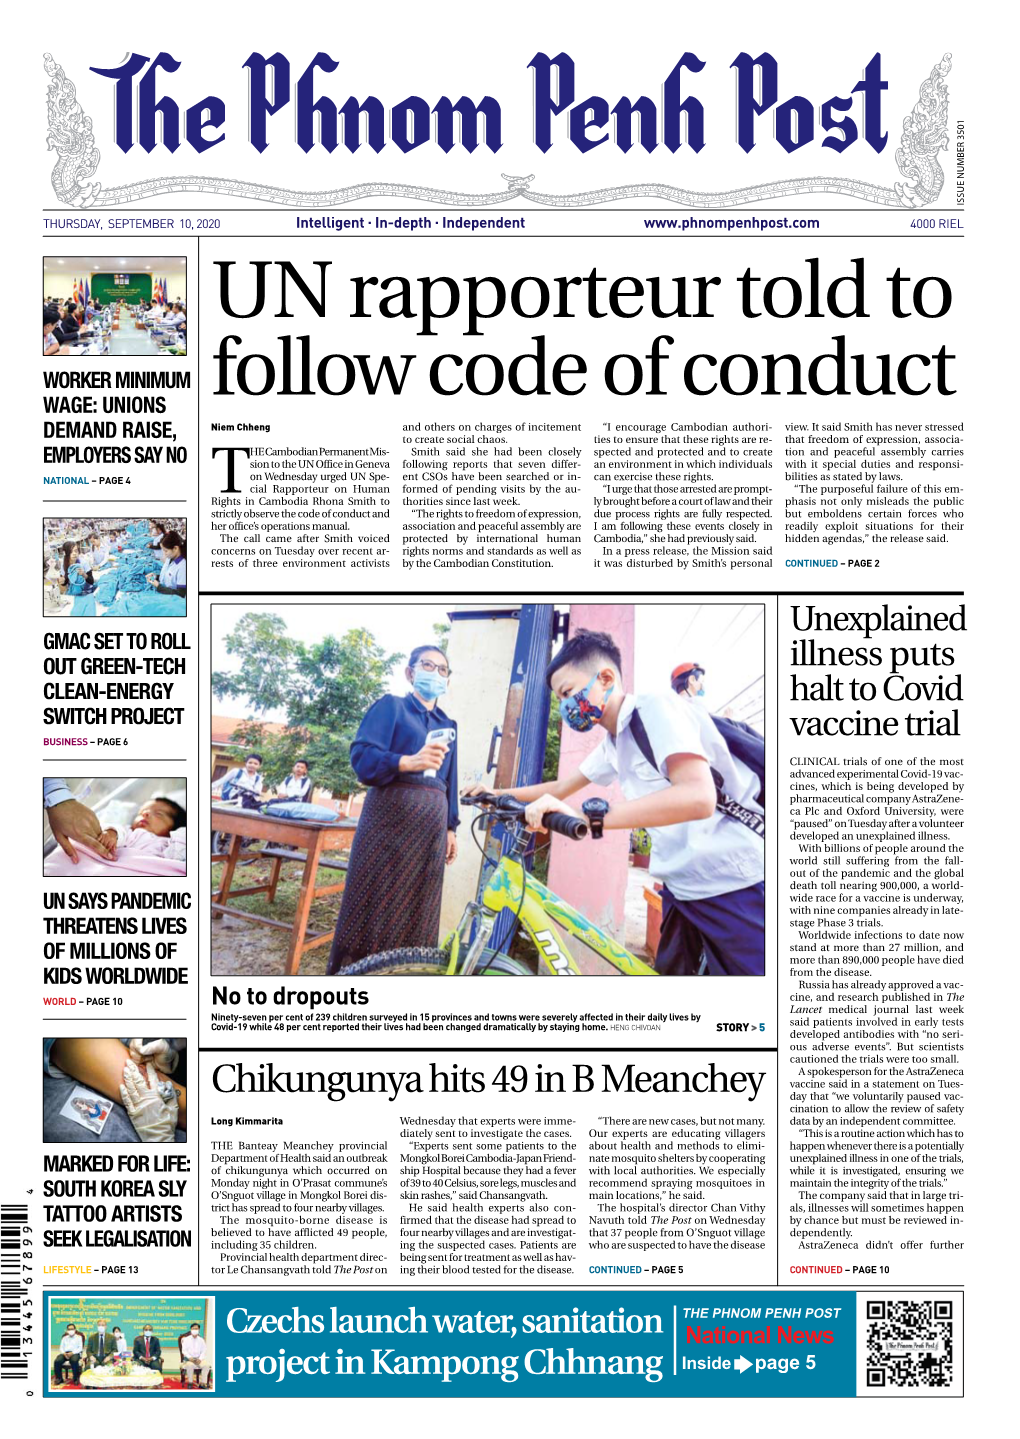 UN Rapporteur Told to Follow Code of Conduct